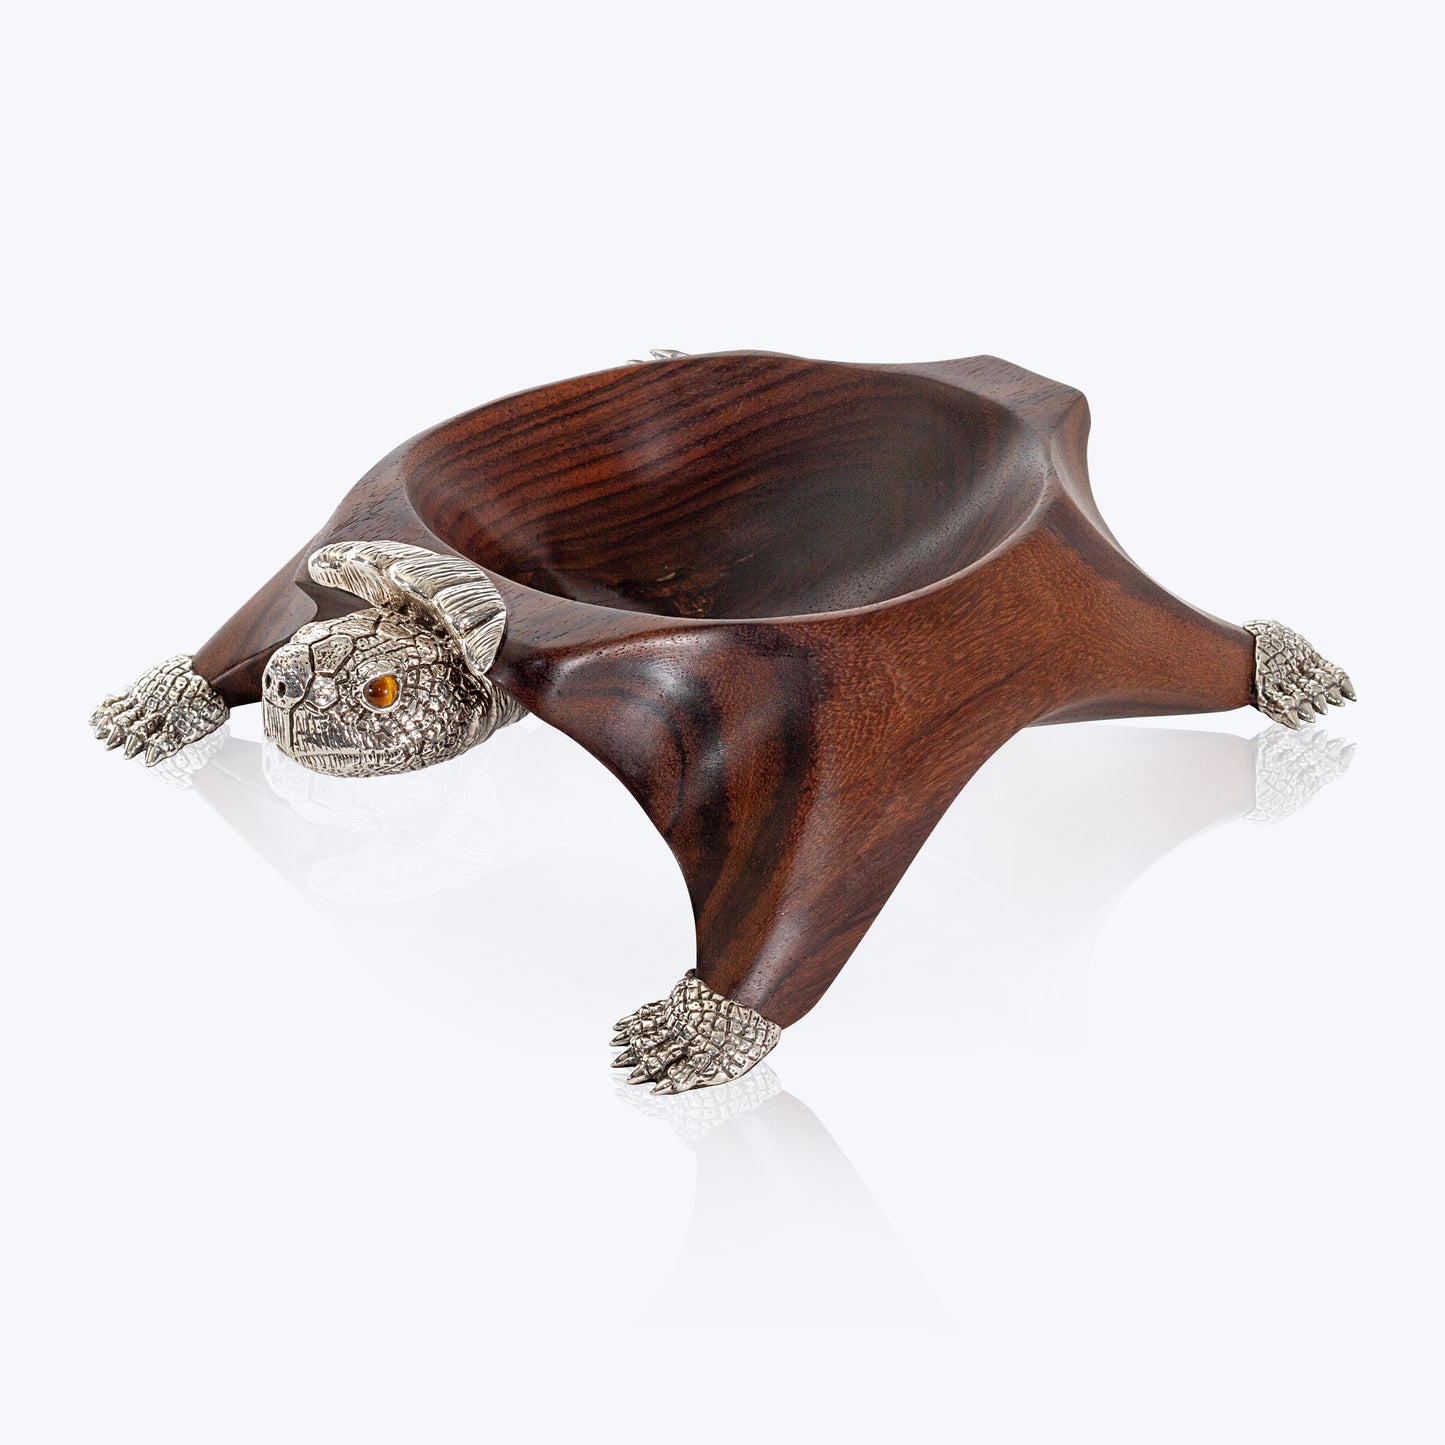 Wooden Turtle Bowl